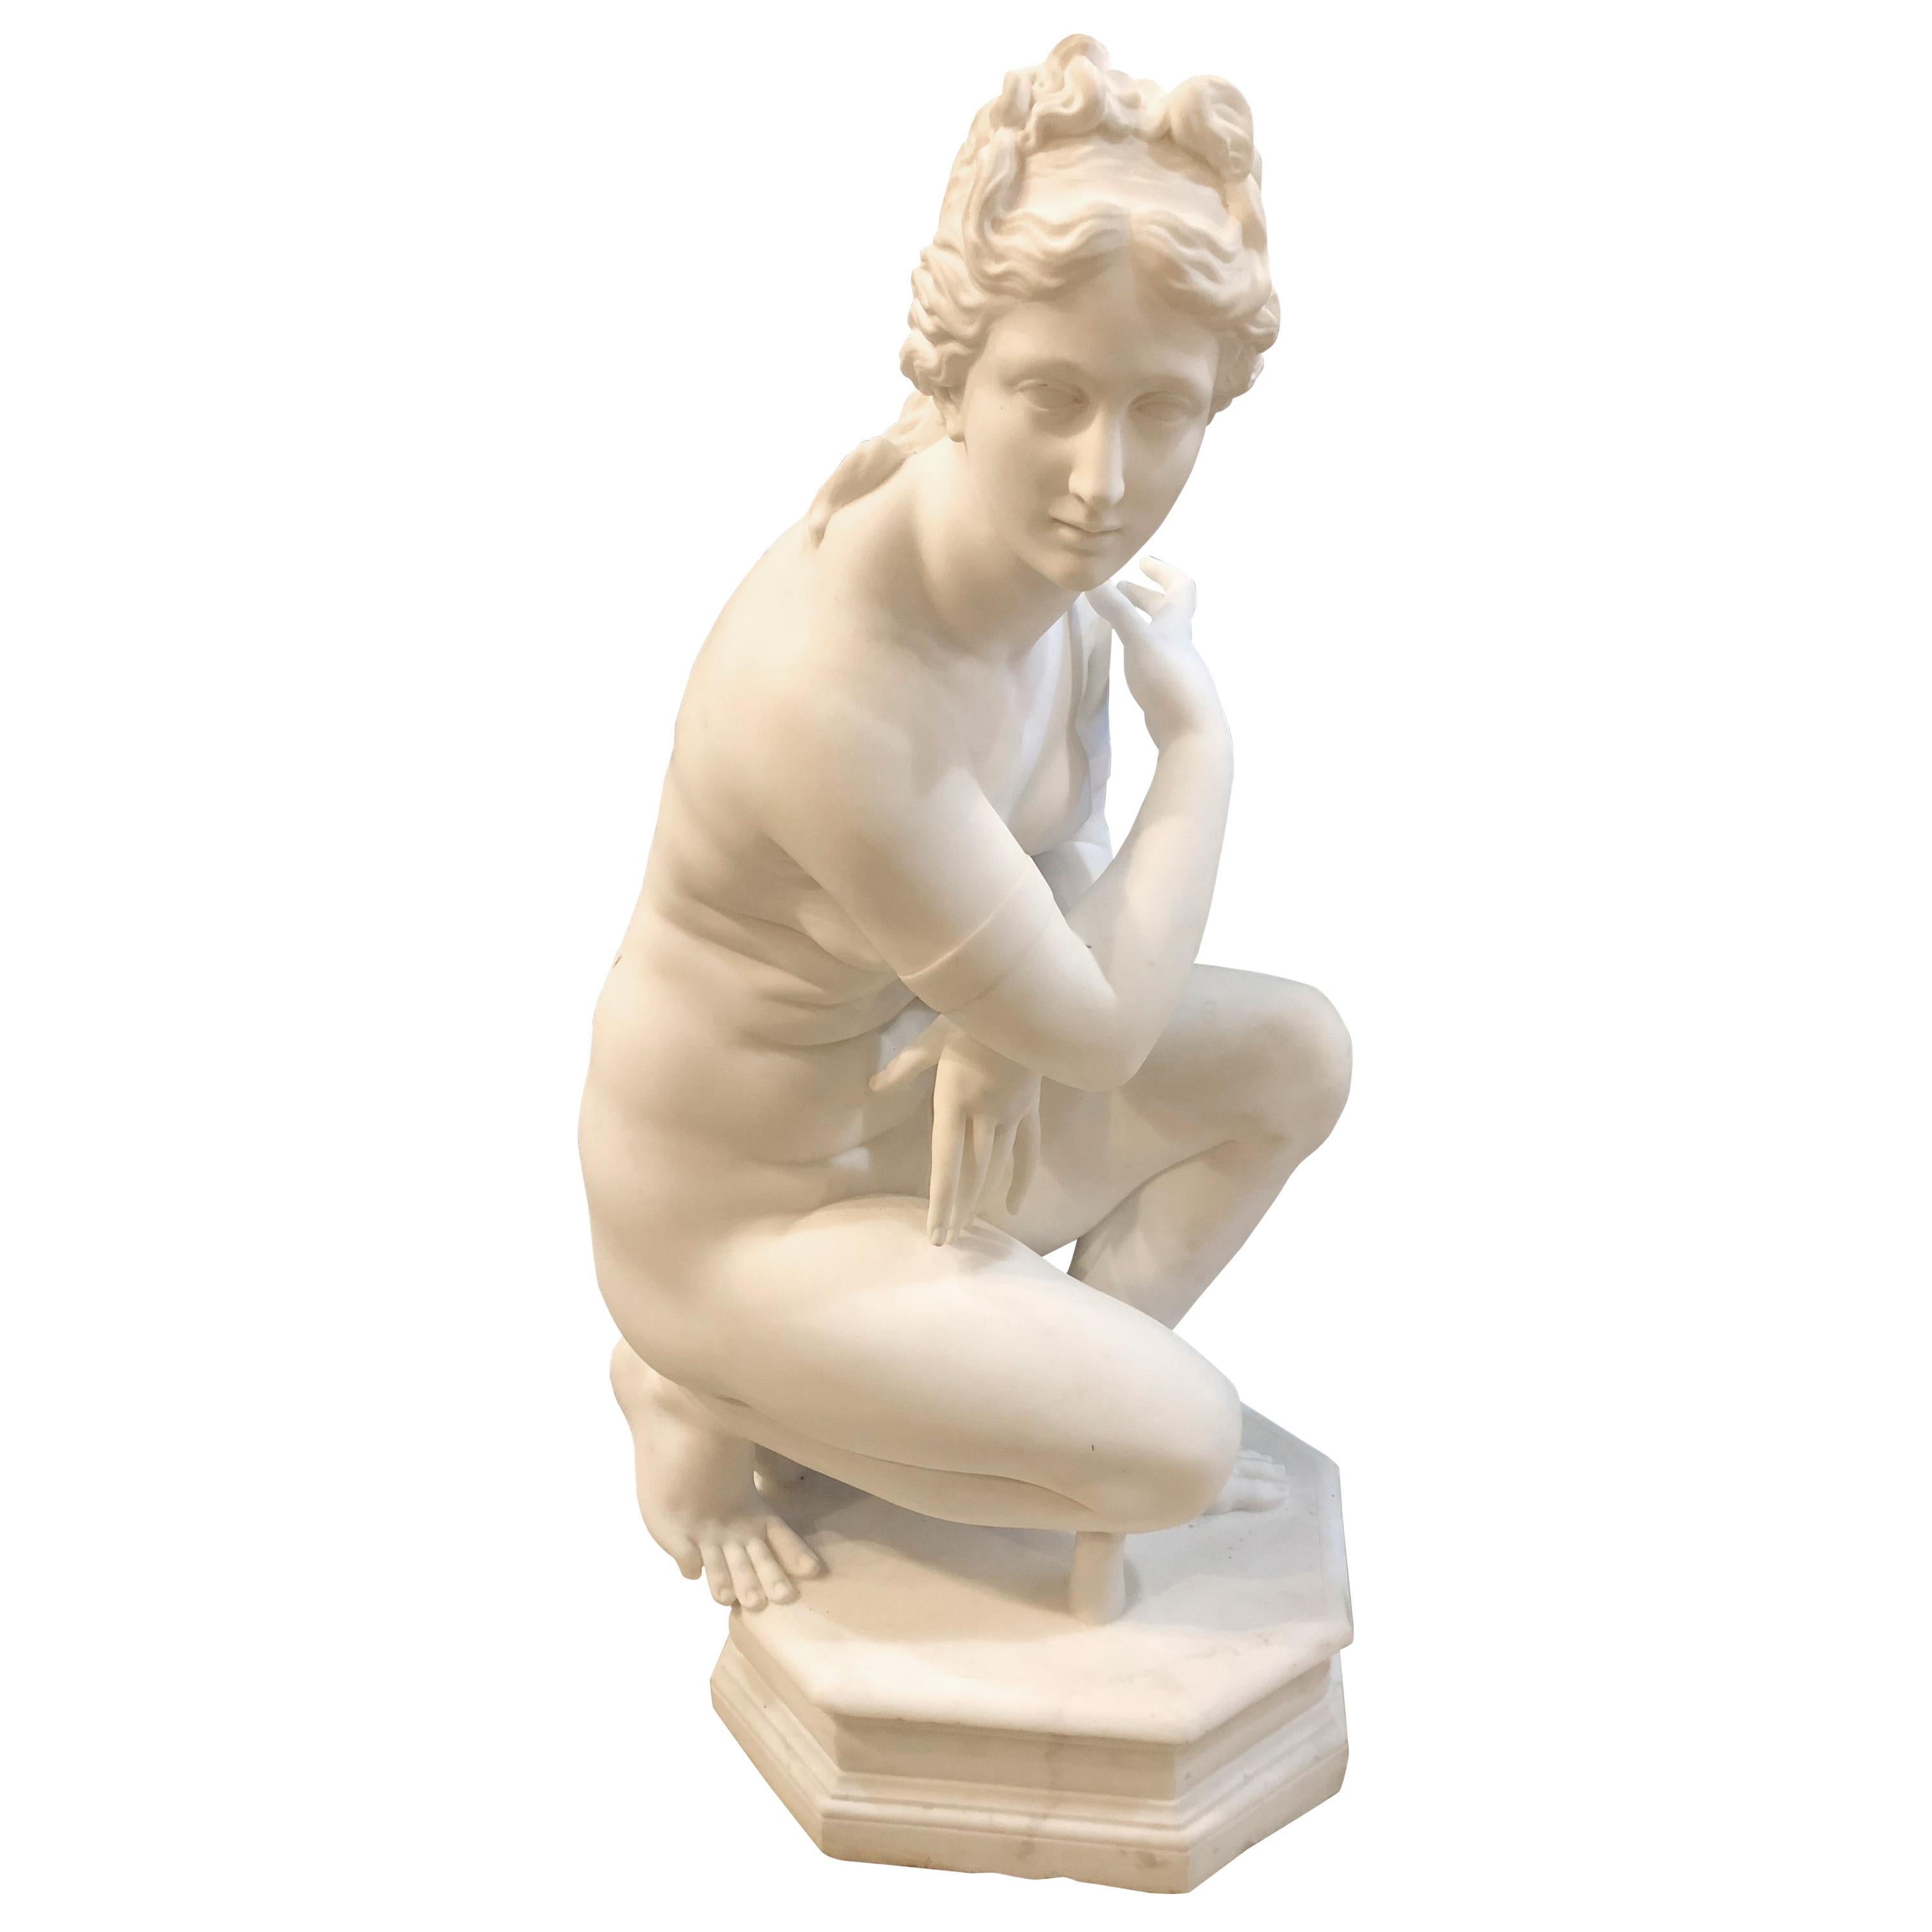 19th Century White Carrara Marble of a Nude Life Size Figure Kneeling